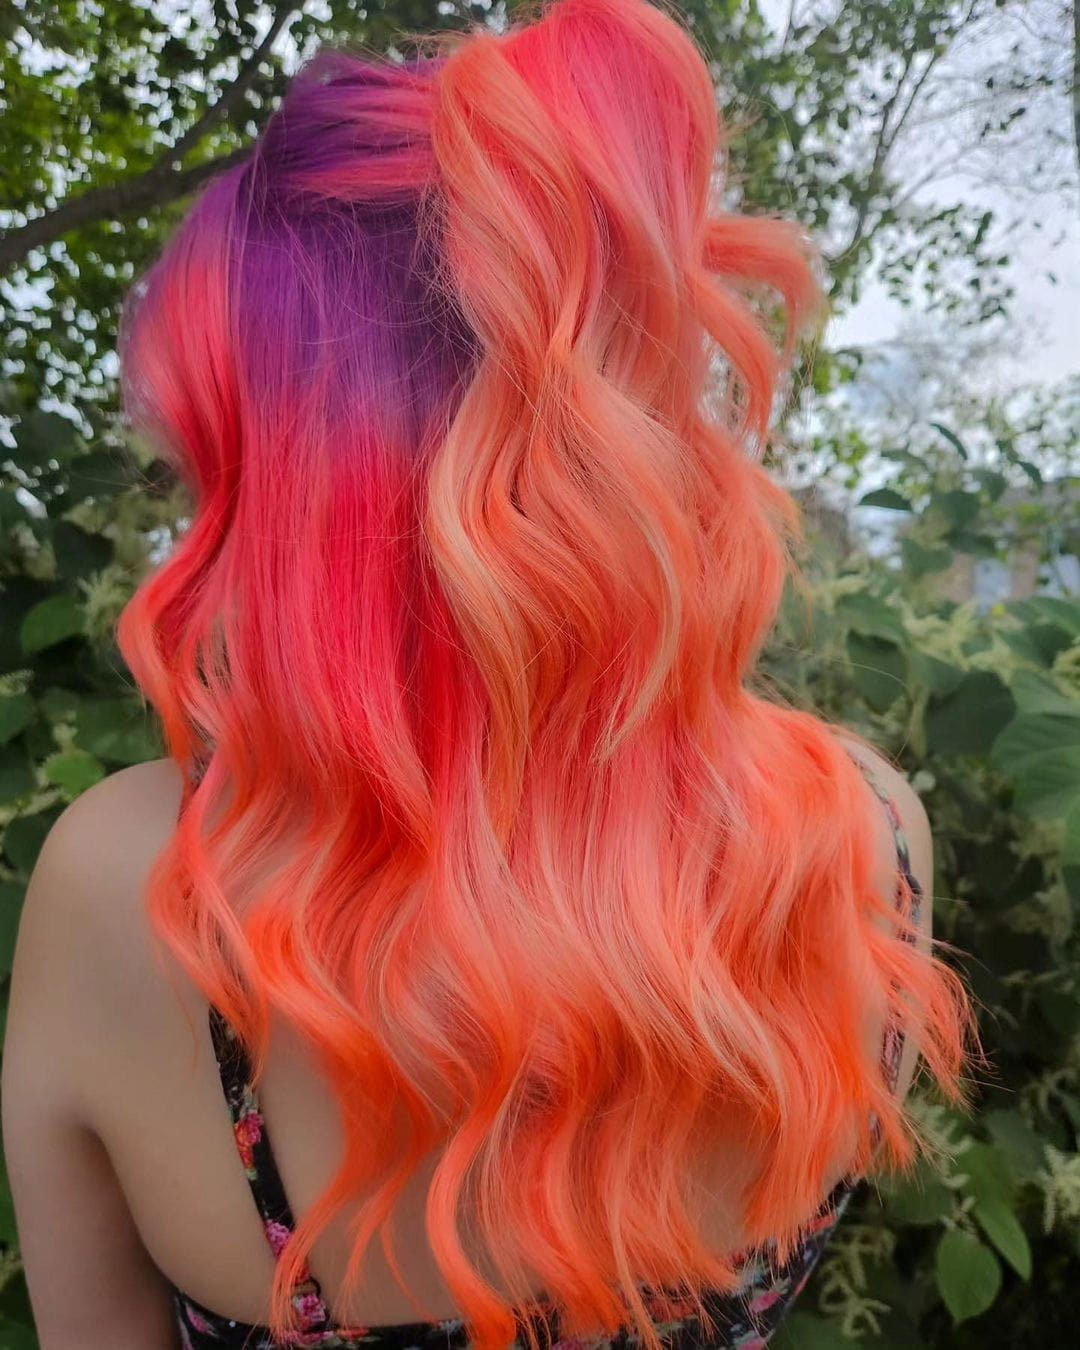 100+ Best Colorful Hair Ideas images 74